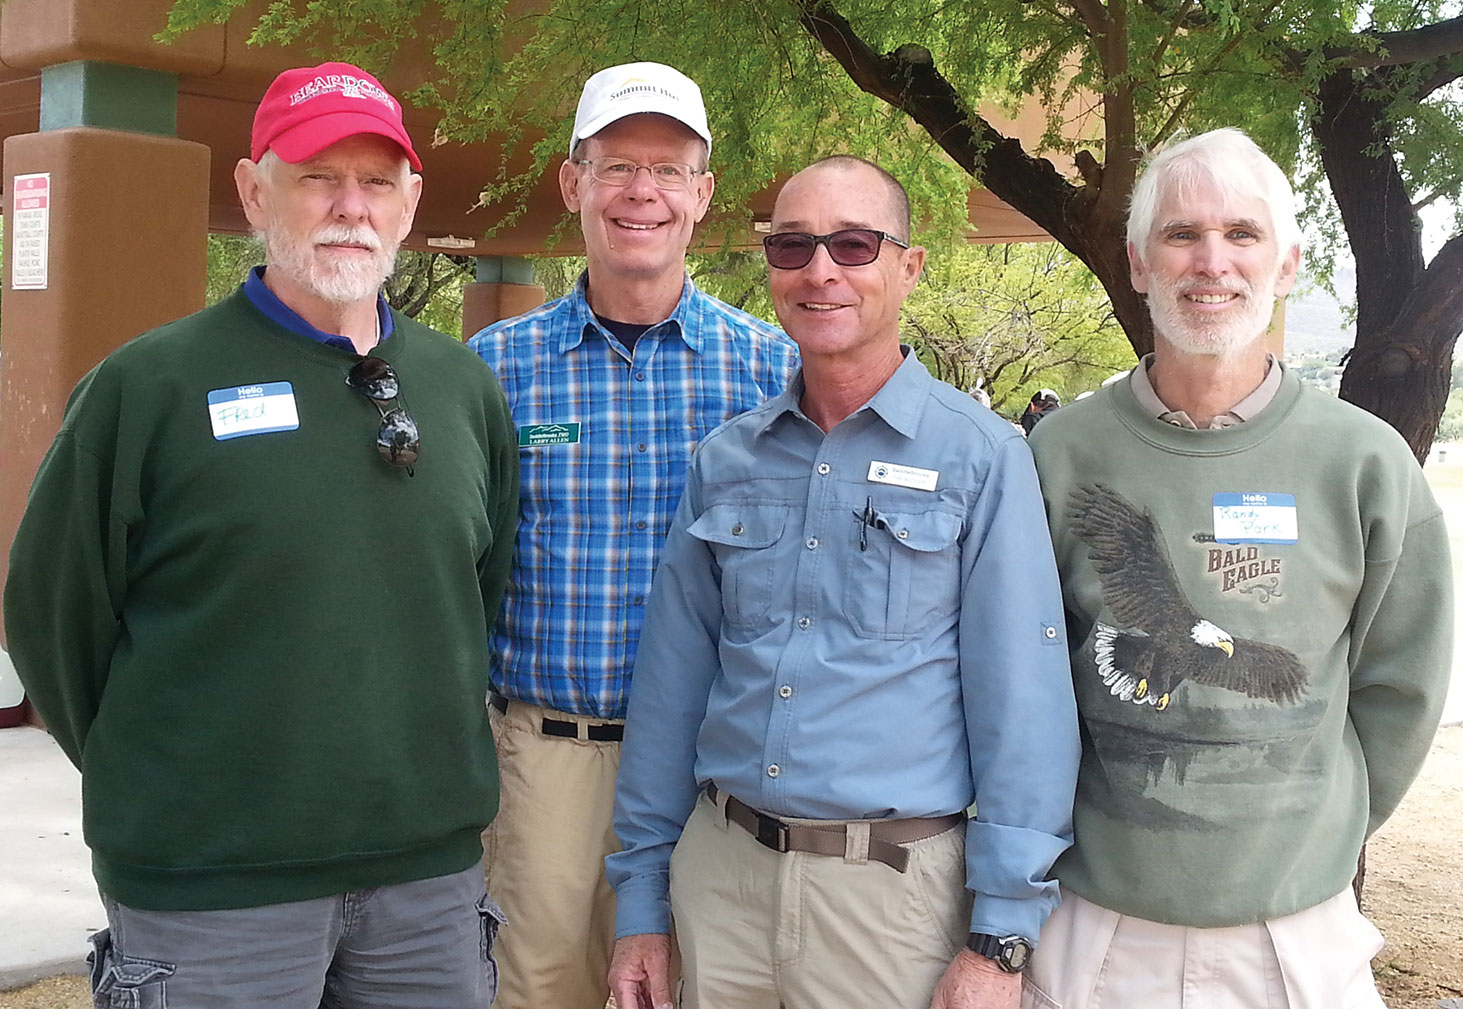 Outgoing SaddleBrooke Hiking Club President Larry Allen, second from left, with three of the new 2015/16 club officers (from left): Fred Norris treasurer, Tim Butler associate chief hiking guide and Randy Park vice president.